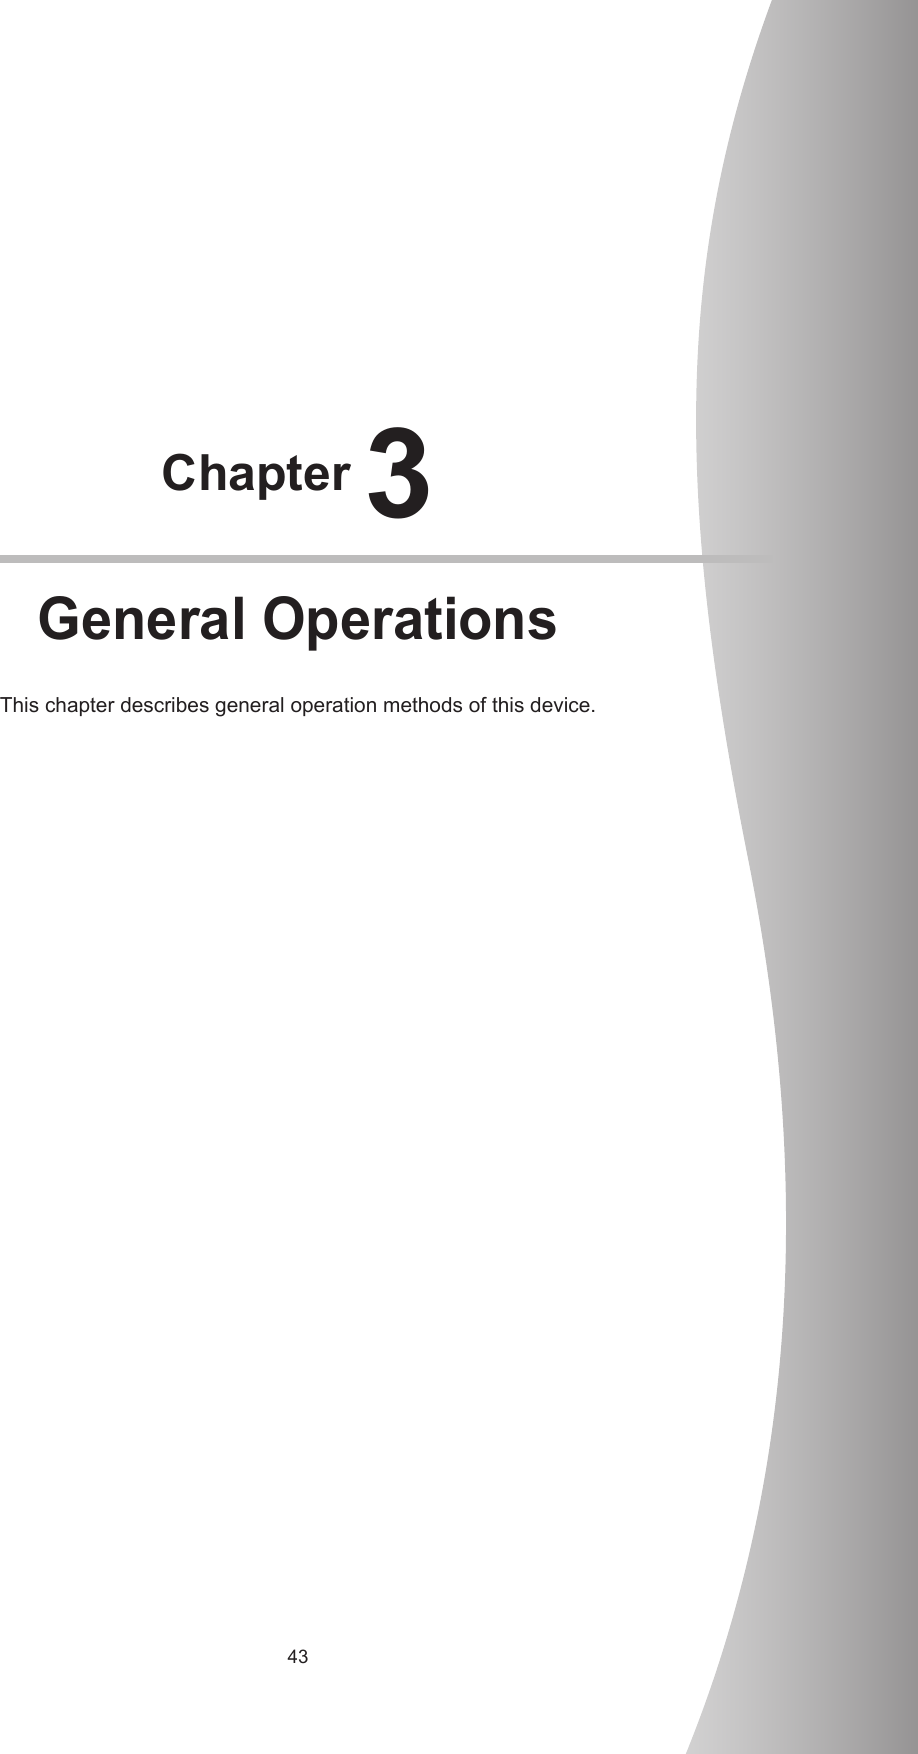 43Chapter 3General OperationsThis chapter describes general operation methods of this device.